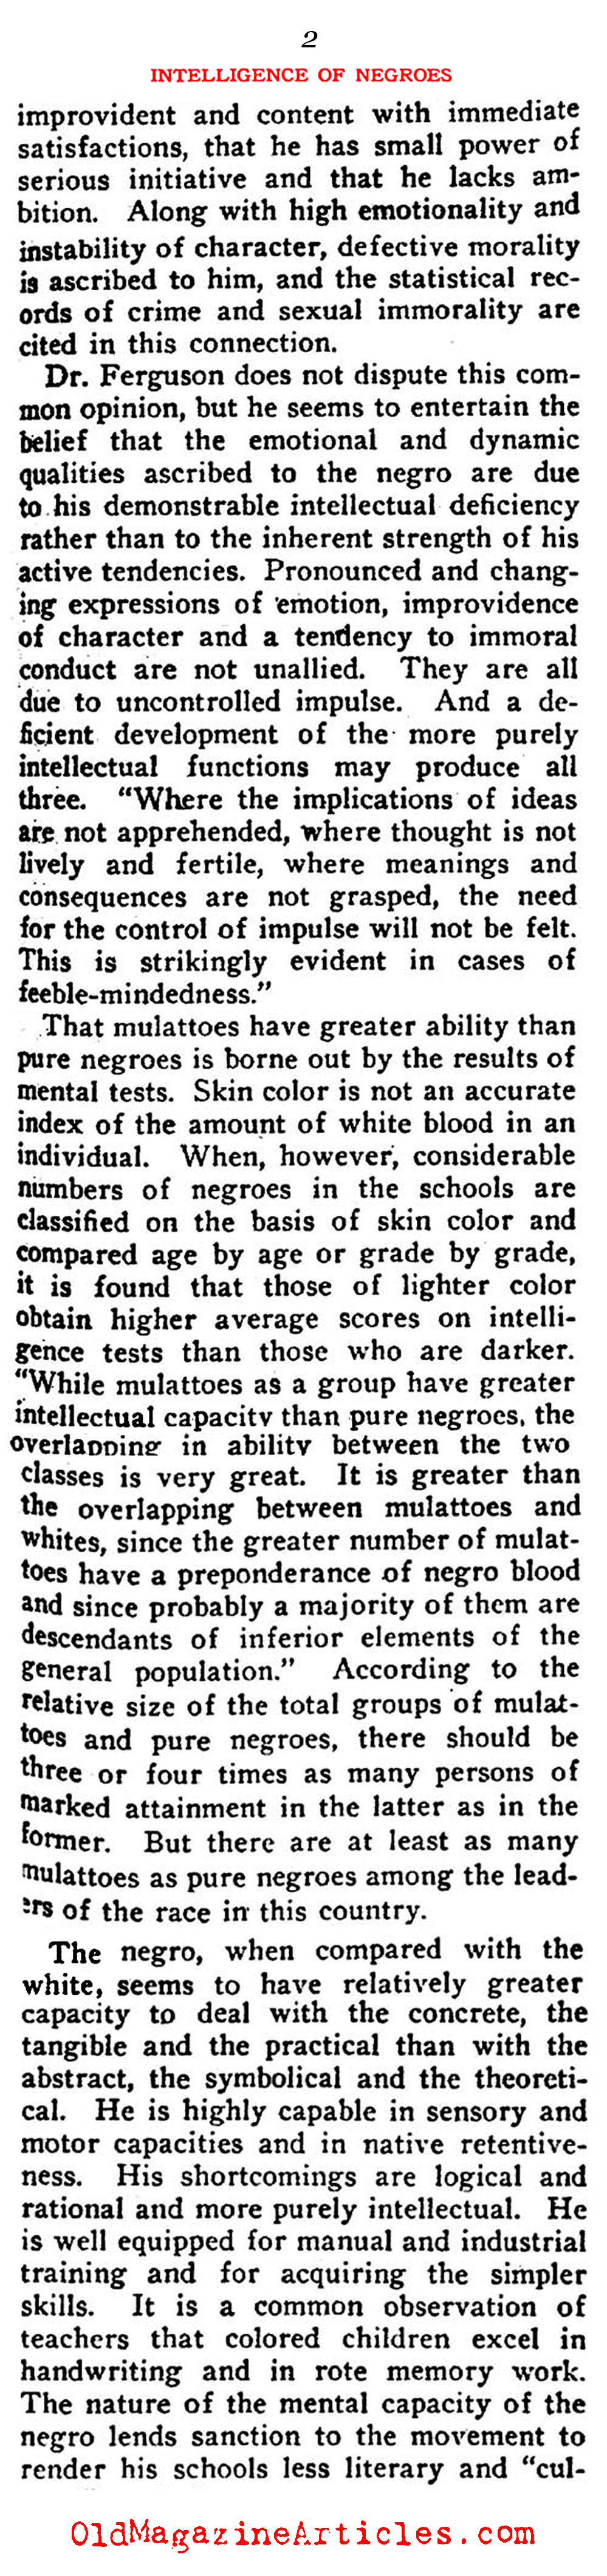 Bogus Science and the Intelligence of African-Americans (Current Opinion, 1921)